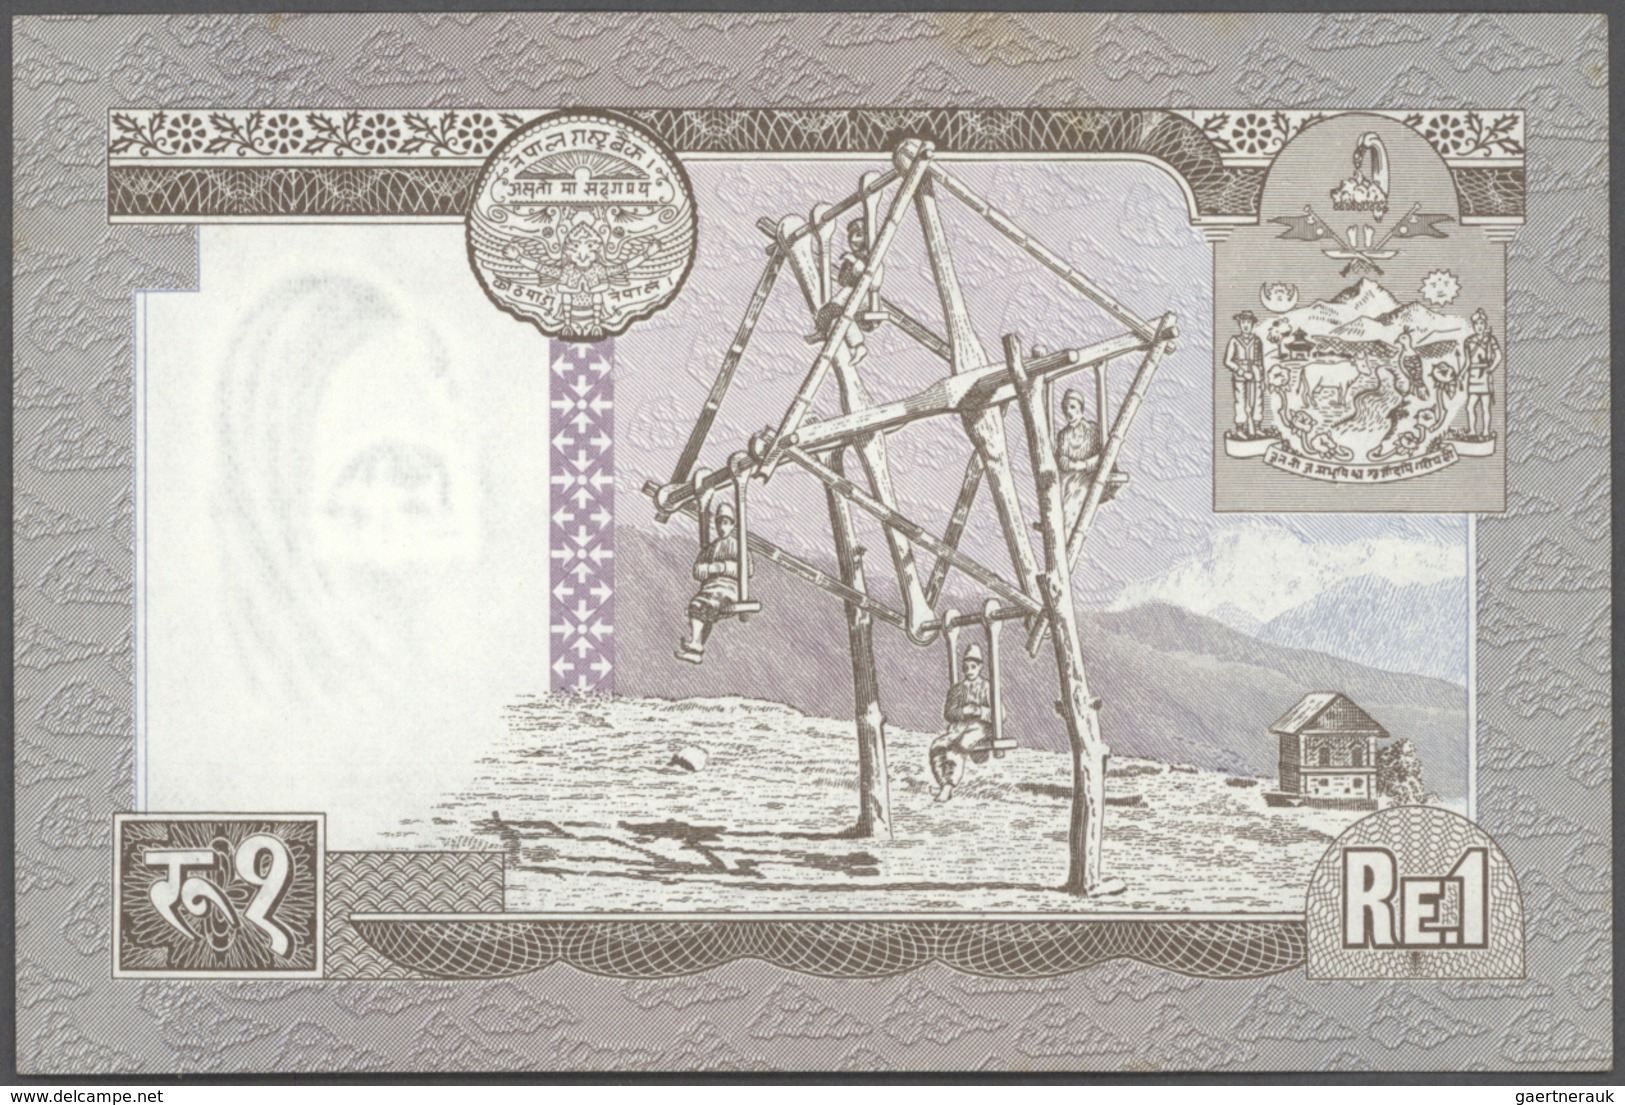 Nepal: set of 26 notes containing the following Pick numbers P. 1, 5, 8, 9, 10, 15, 16, 22, 23, 24,